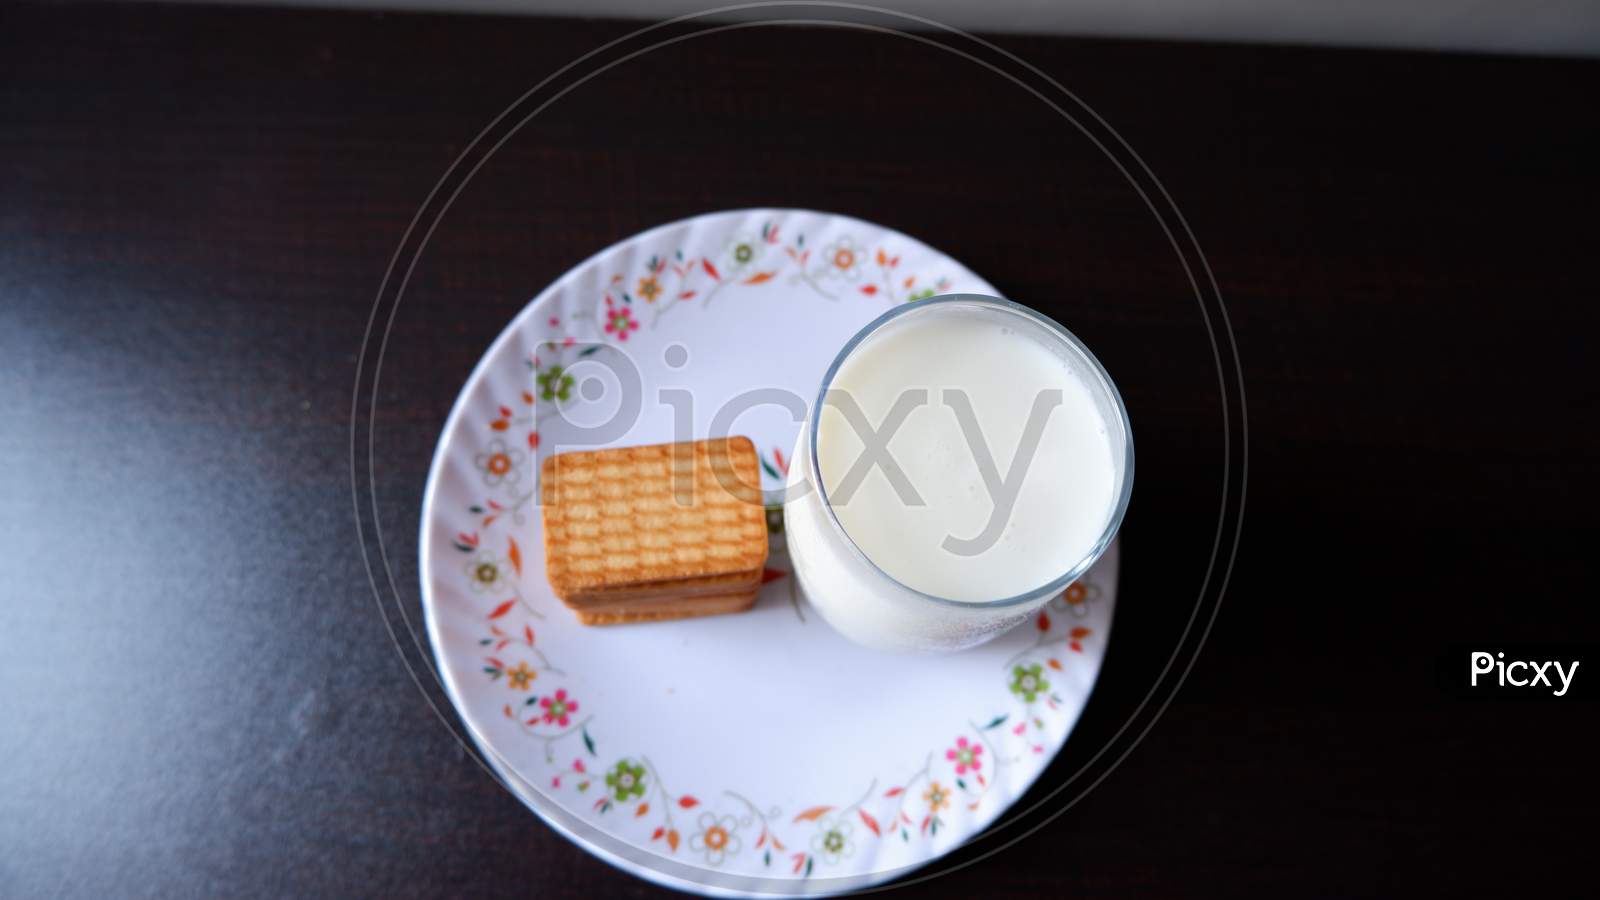 Glucose biscuits and Glass of milk served in white printed plate with black background